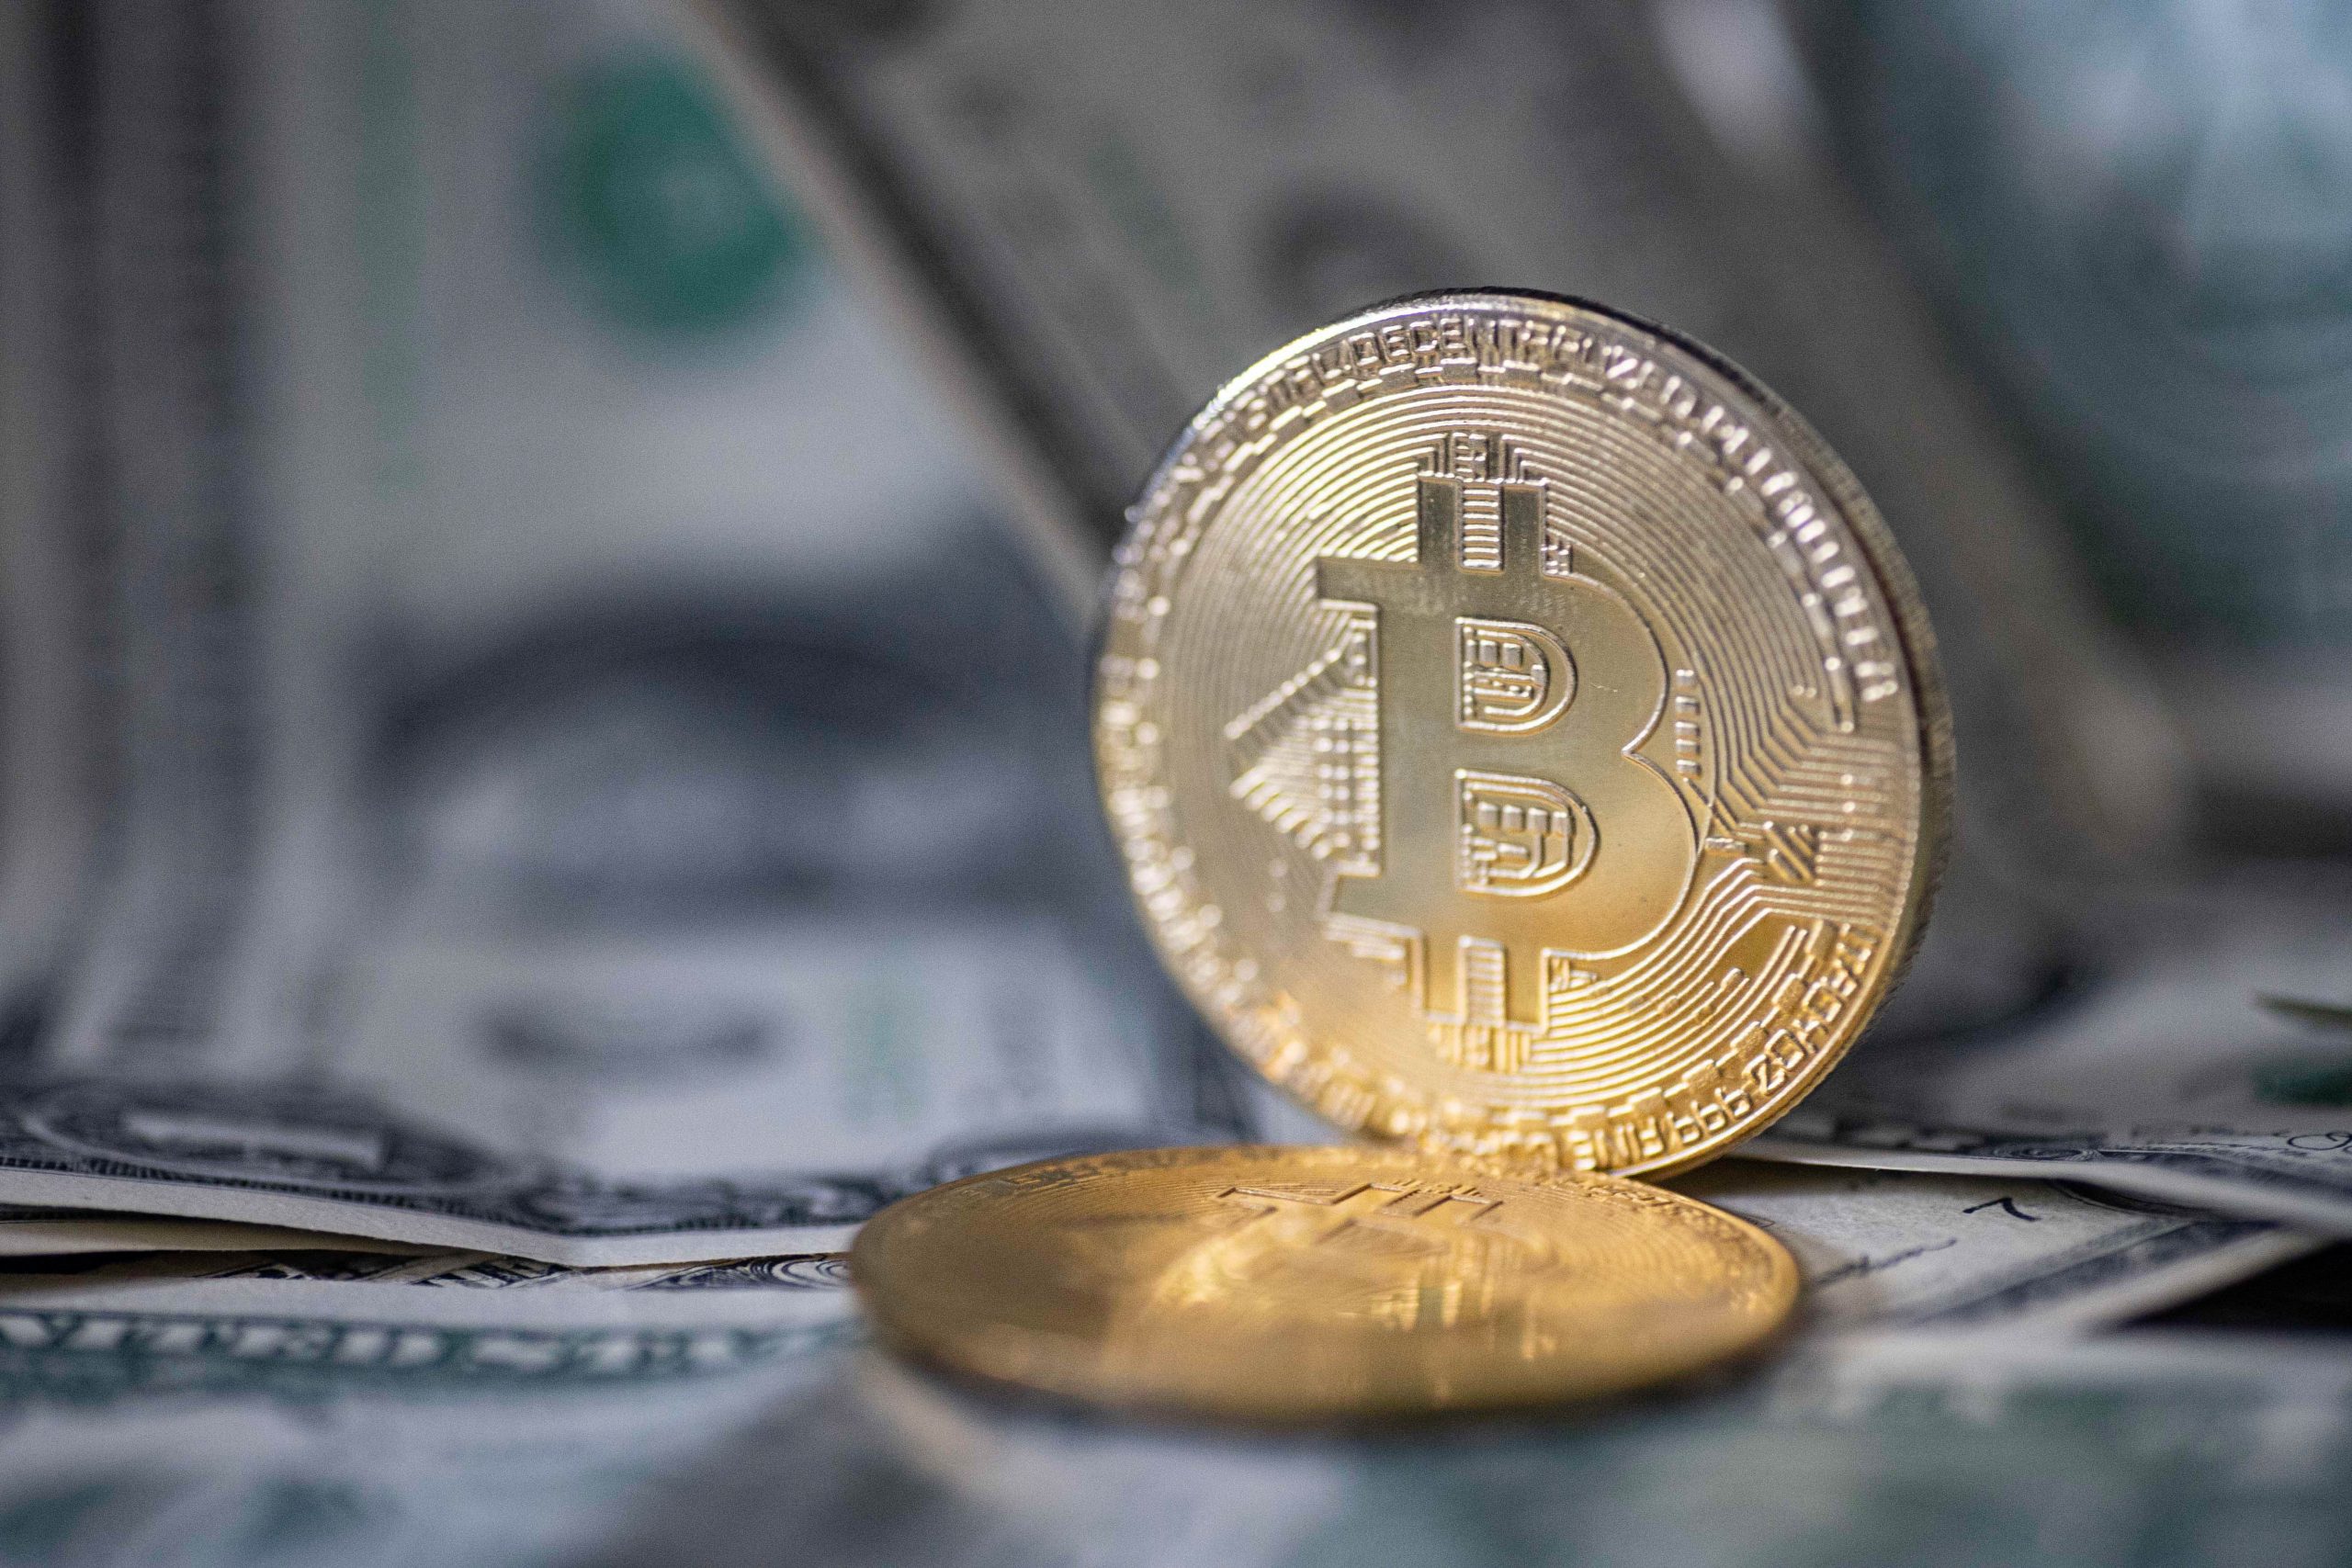 How dangerous is BTC really for euros and US dollars?